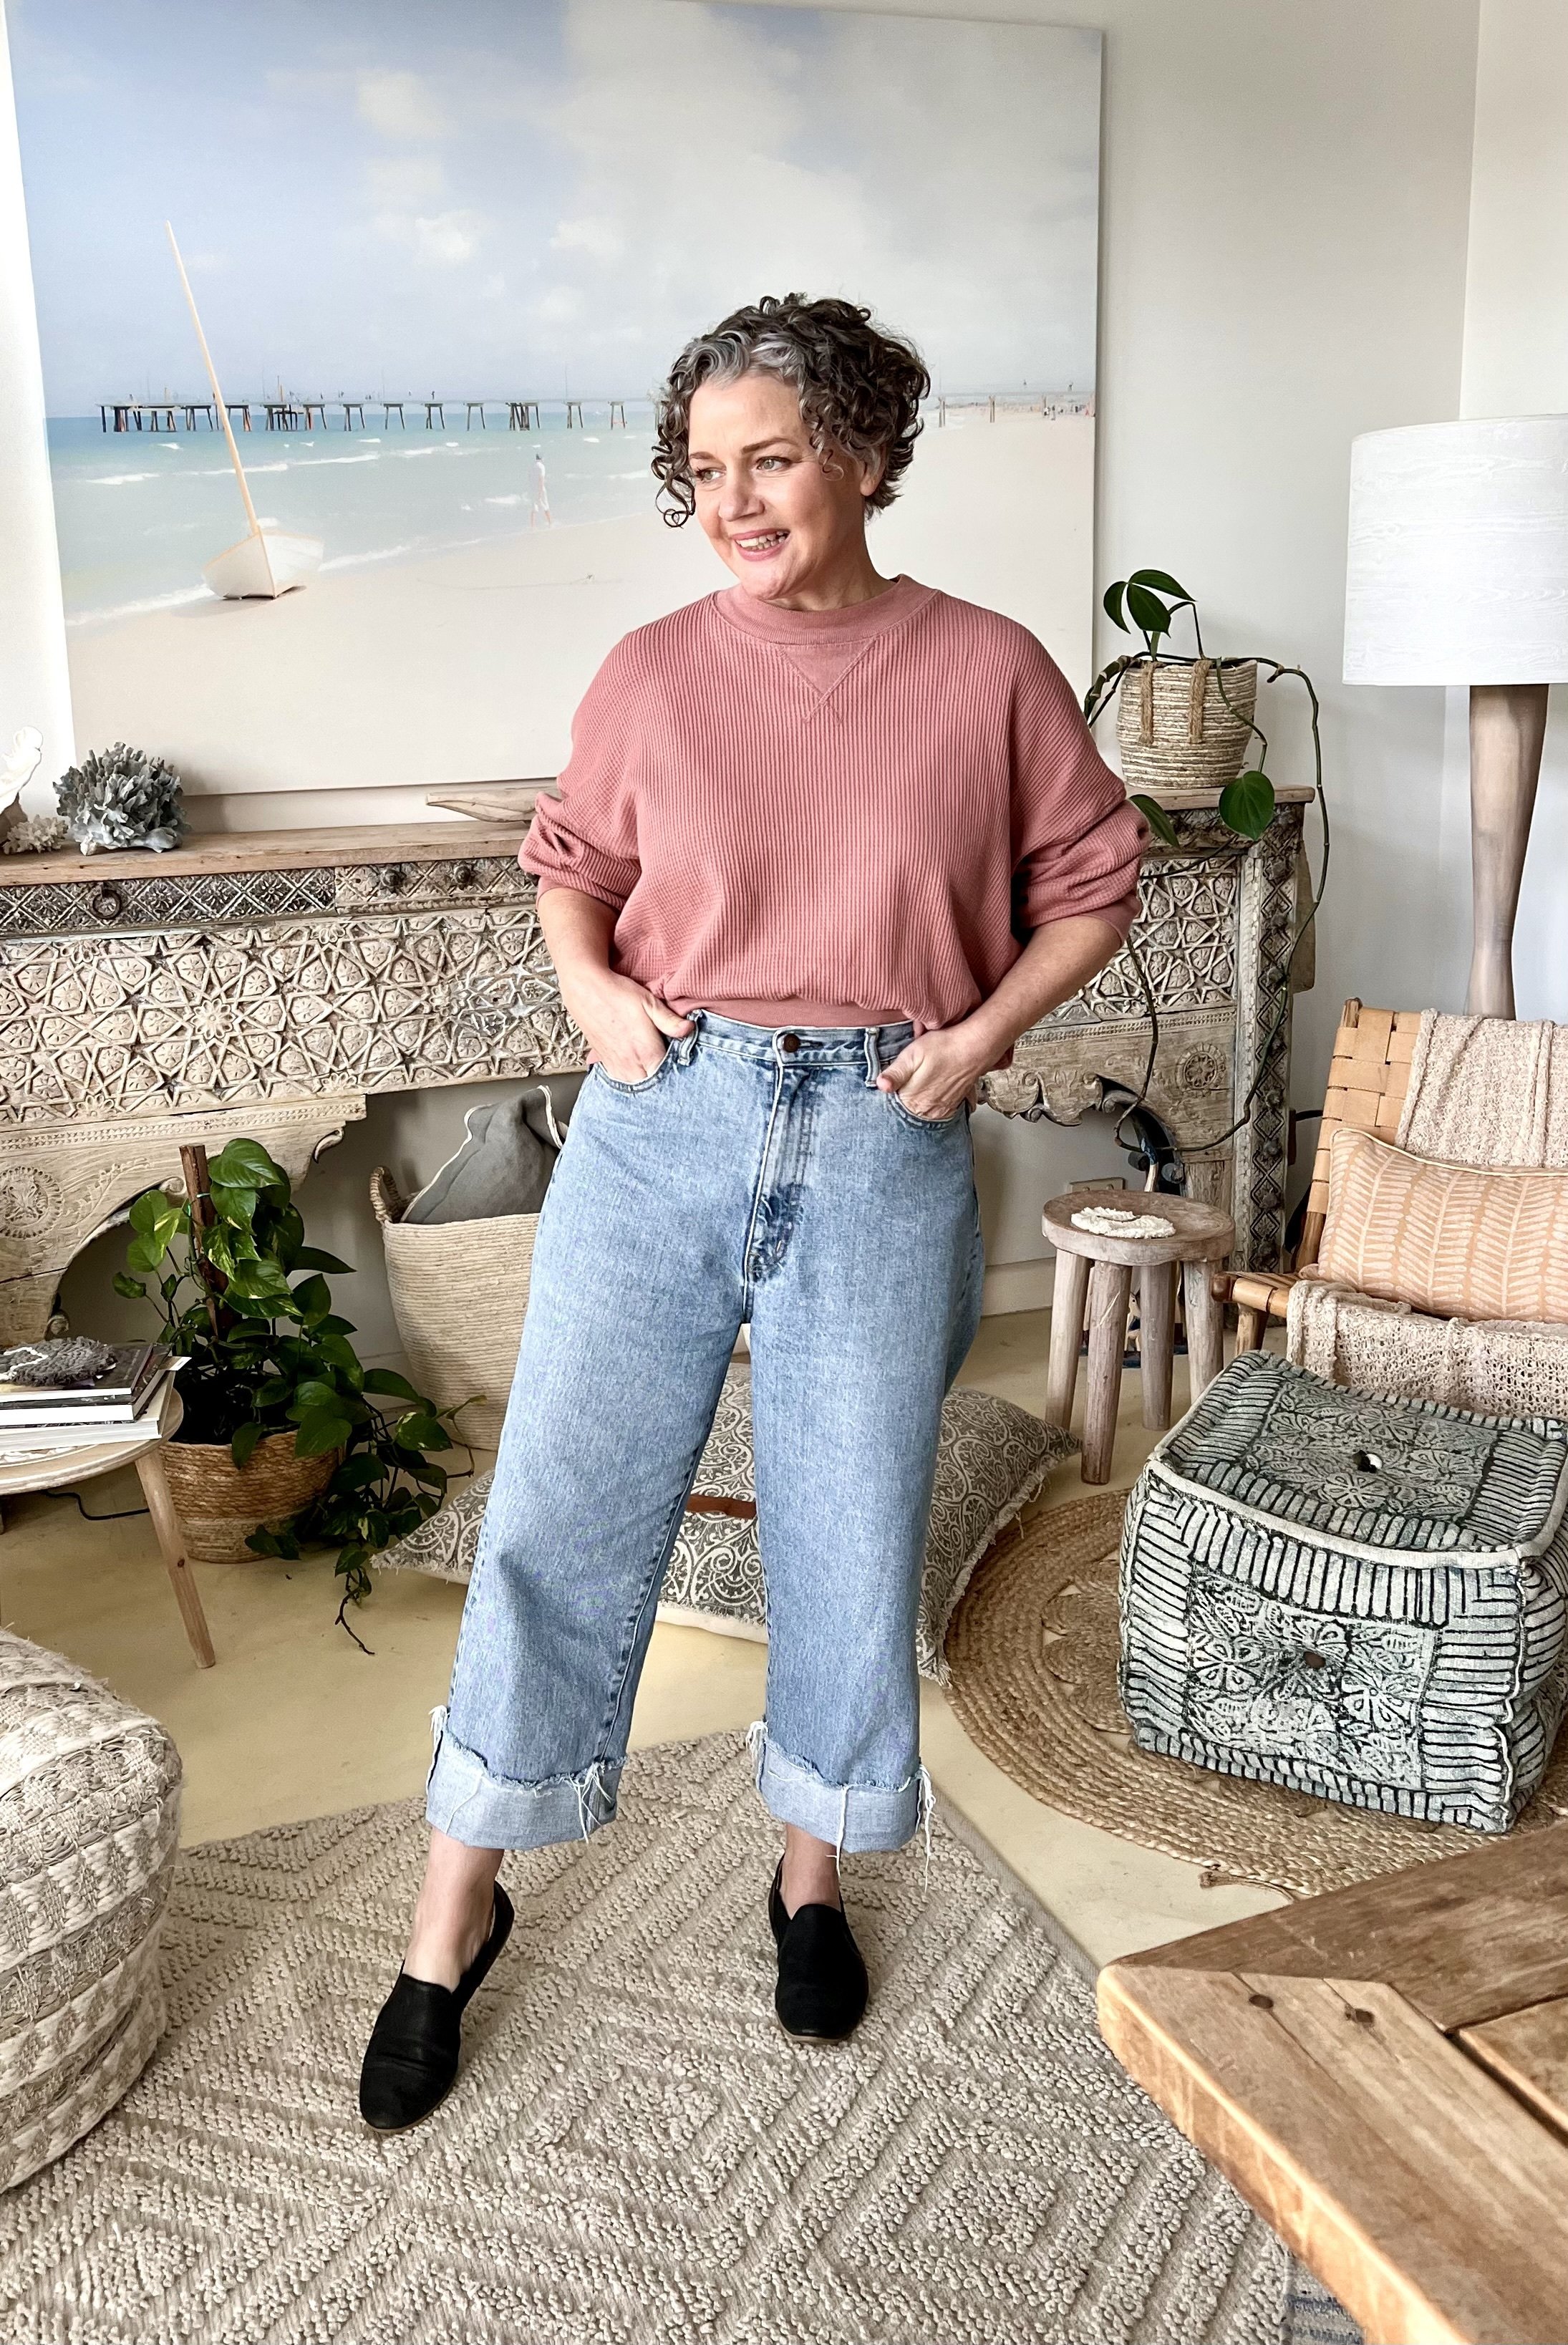 How to style wide leg jeans to make the most of this cut